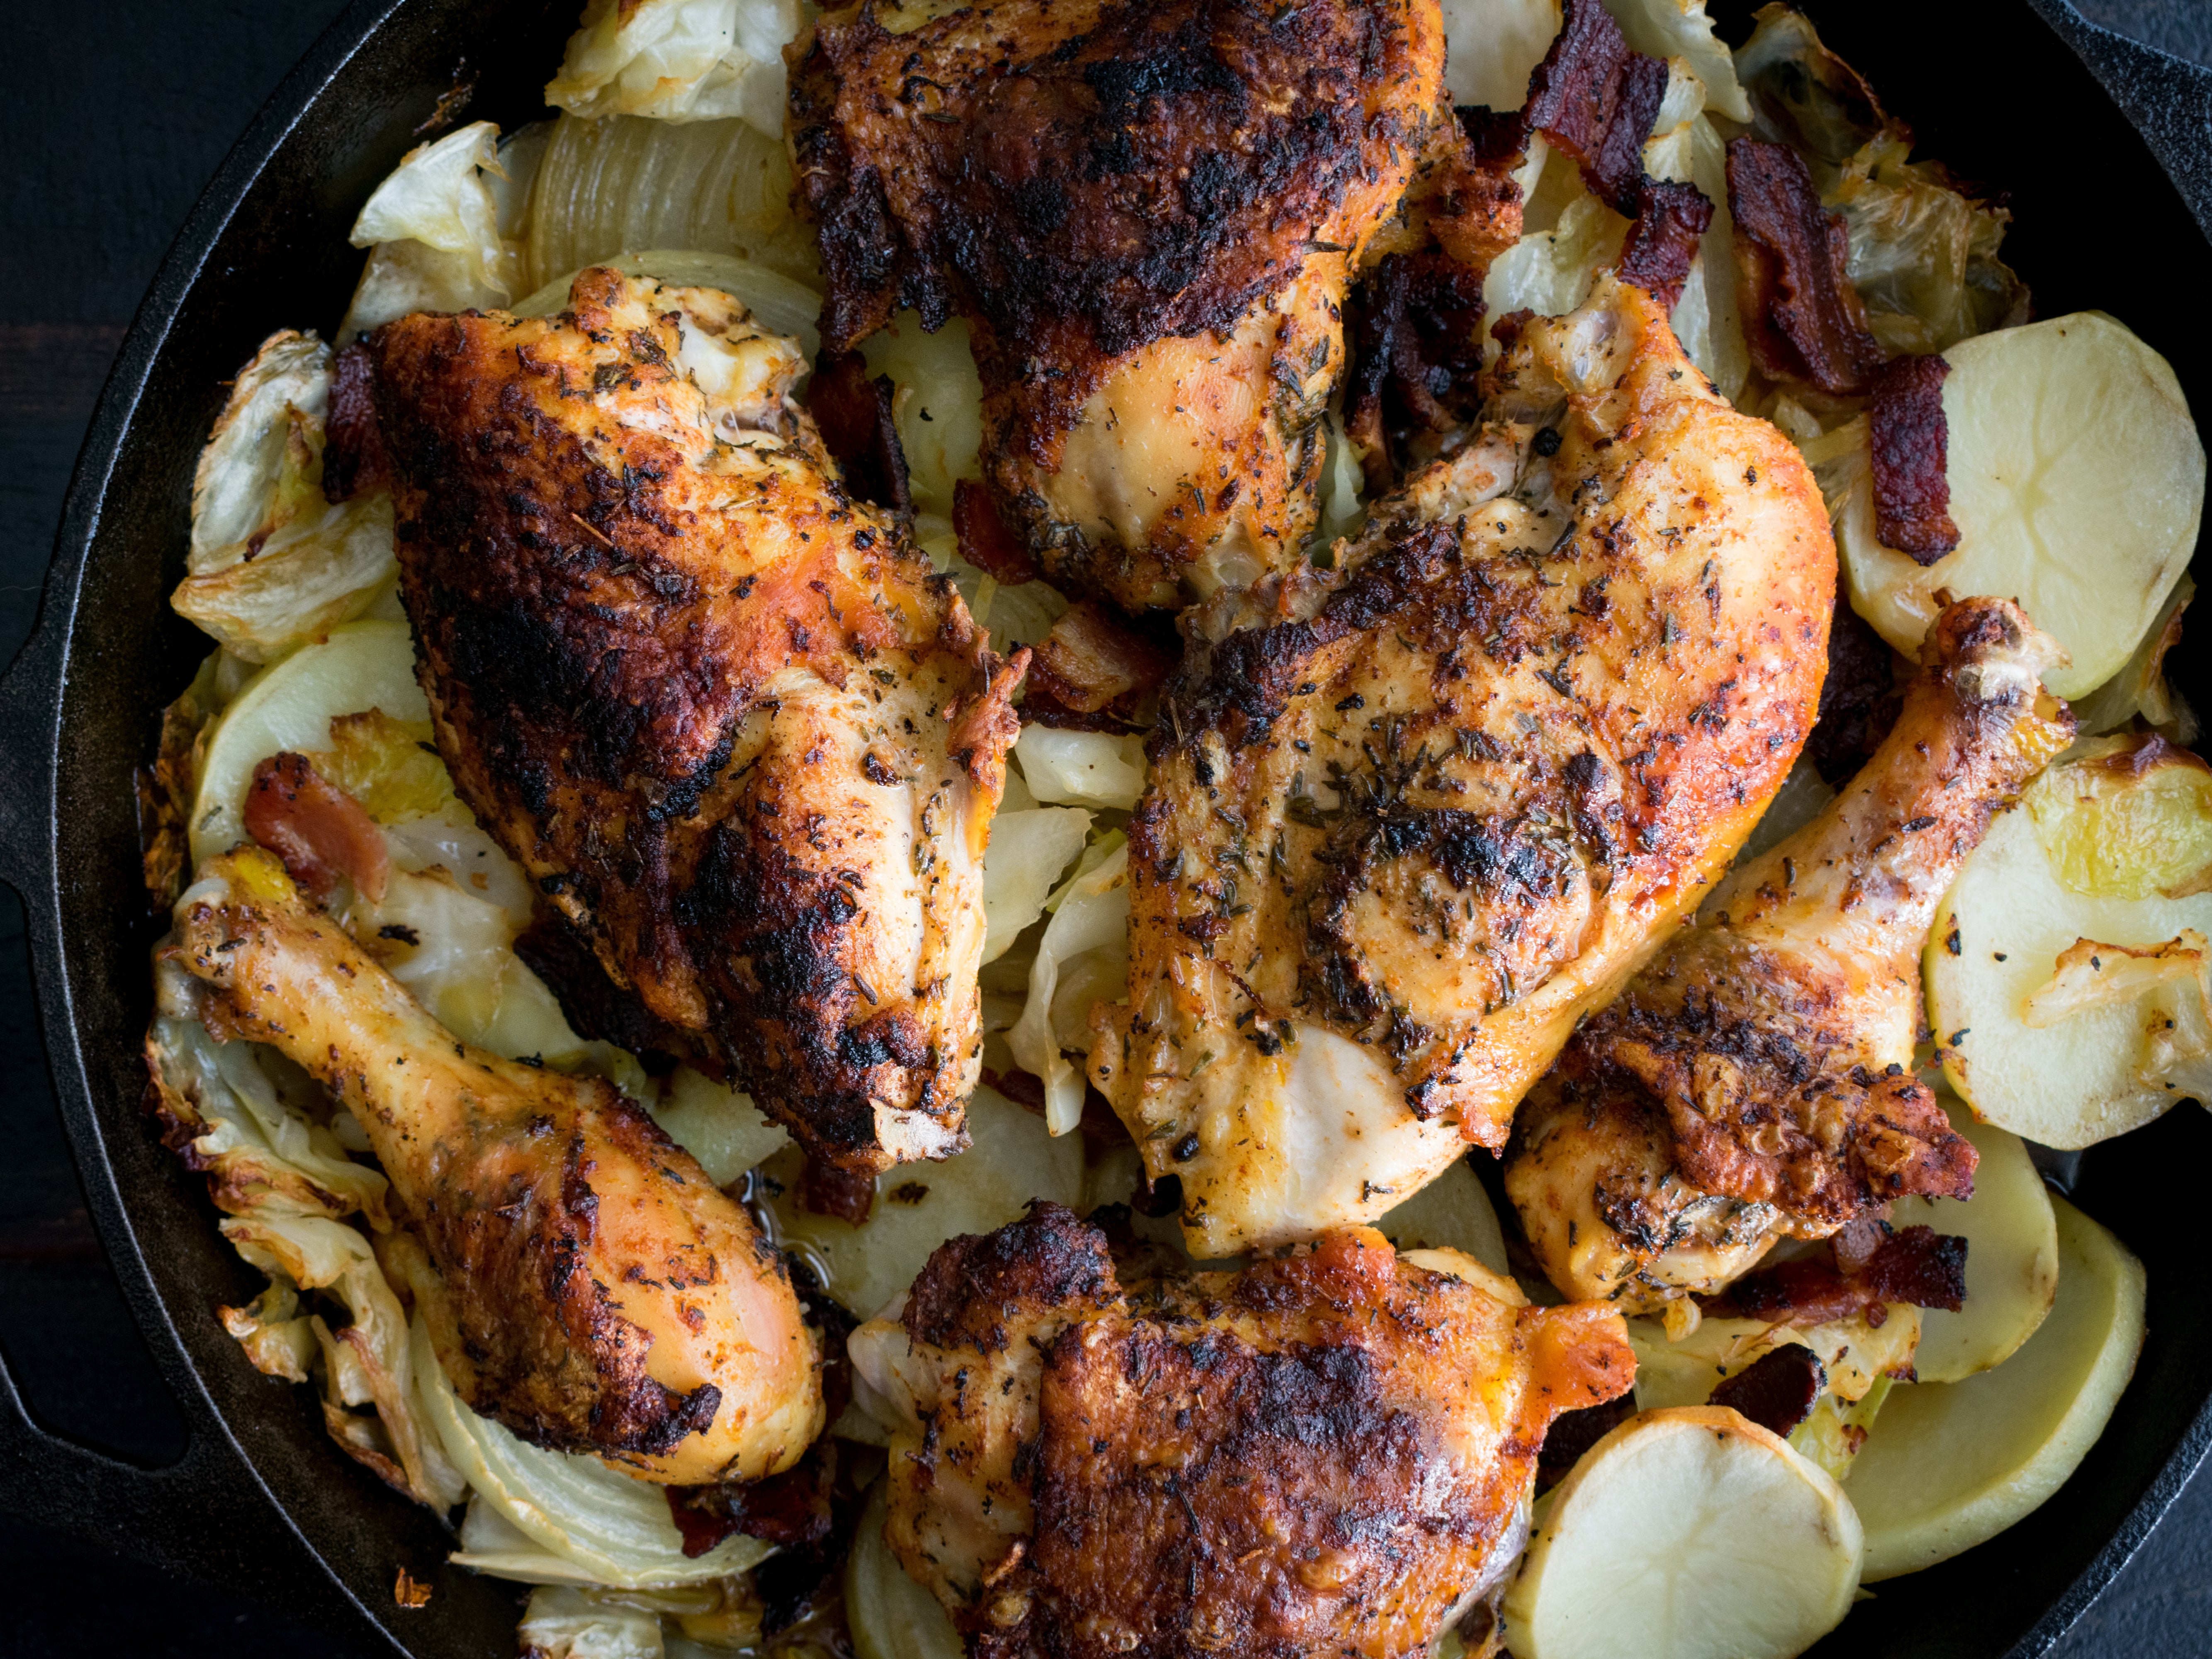 Roast chicken with classic autumn ingredients for a quick, flavourful one-pot supper